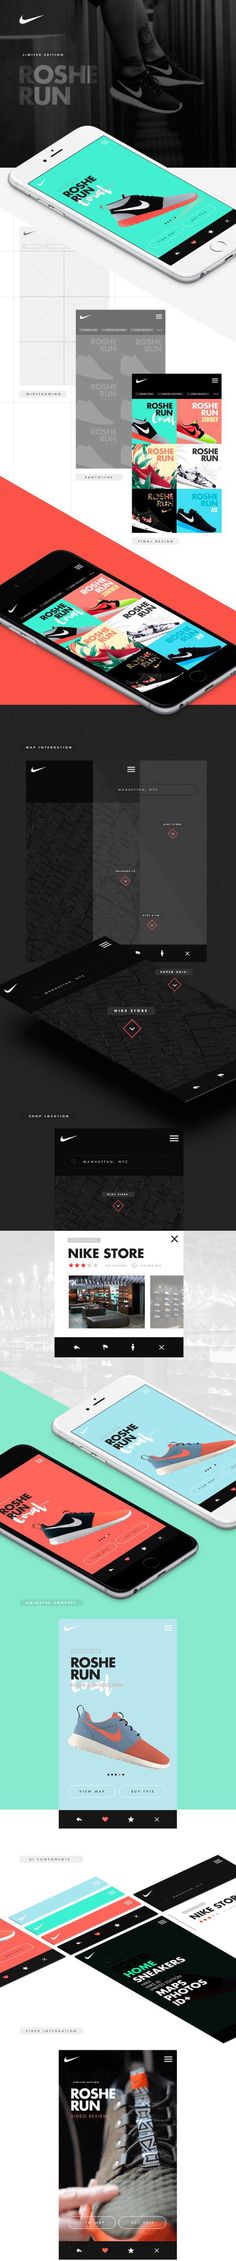 Nike – Roshe Run App by Owi Sixseven